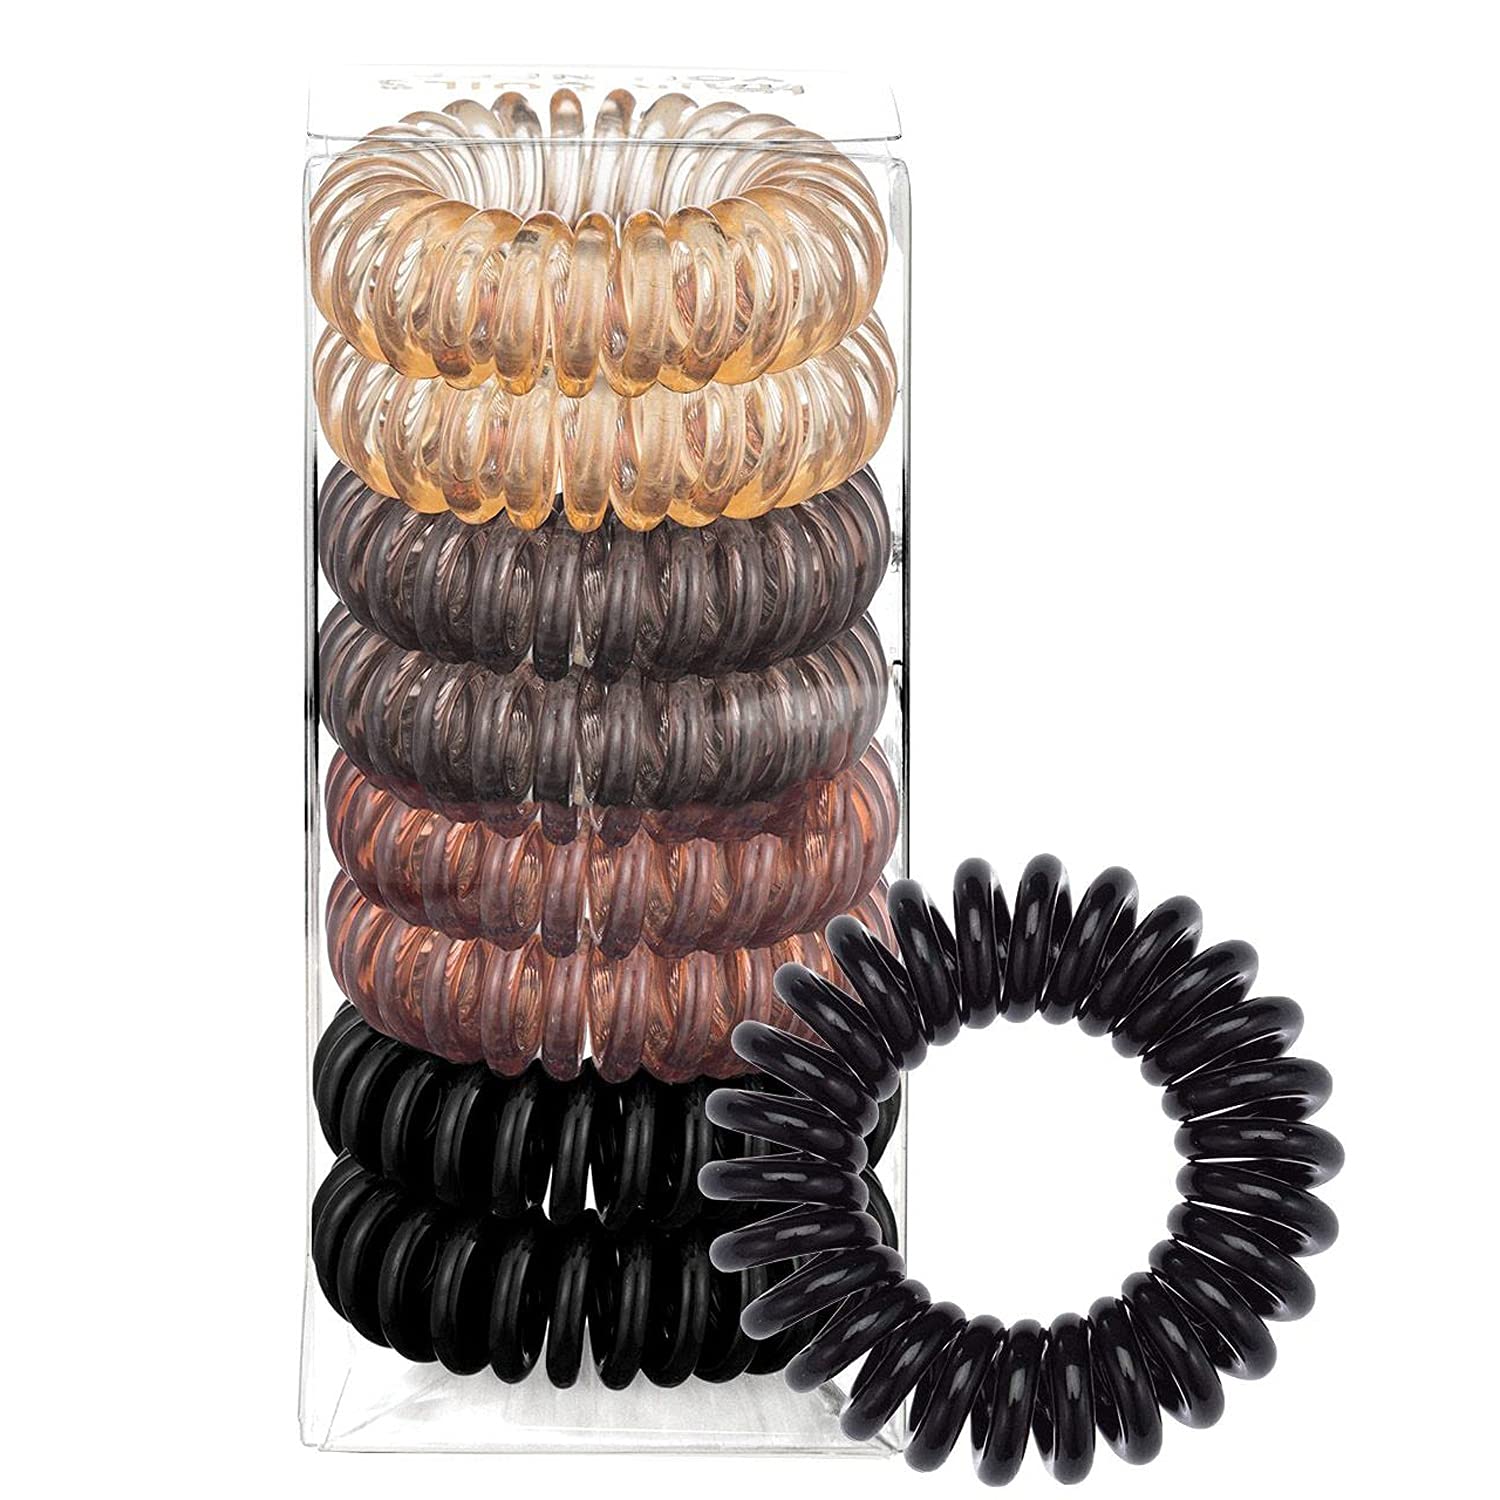 8 Pack Spiral Hair Ties, Traceless Hair Rings for Thick Hair, Multicolor Hair Coils, Women Ponytail Holder Elastics, Ponytail Holder Hair Elastics for Girls (Multi-Color) - image 1 of 5